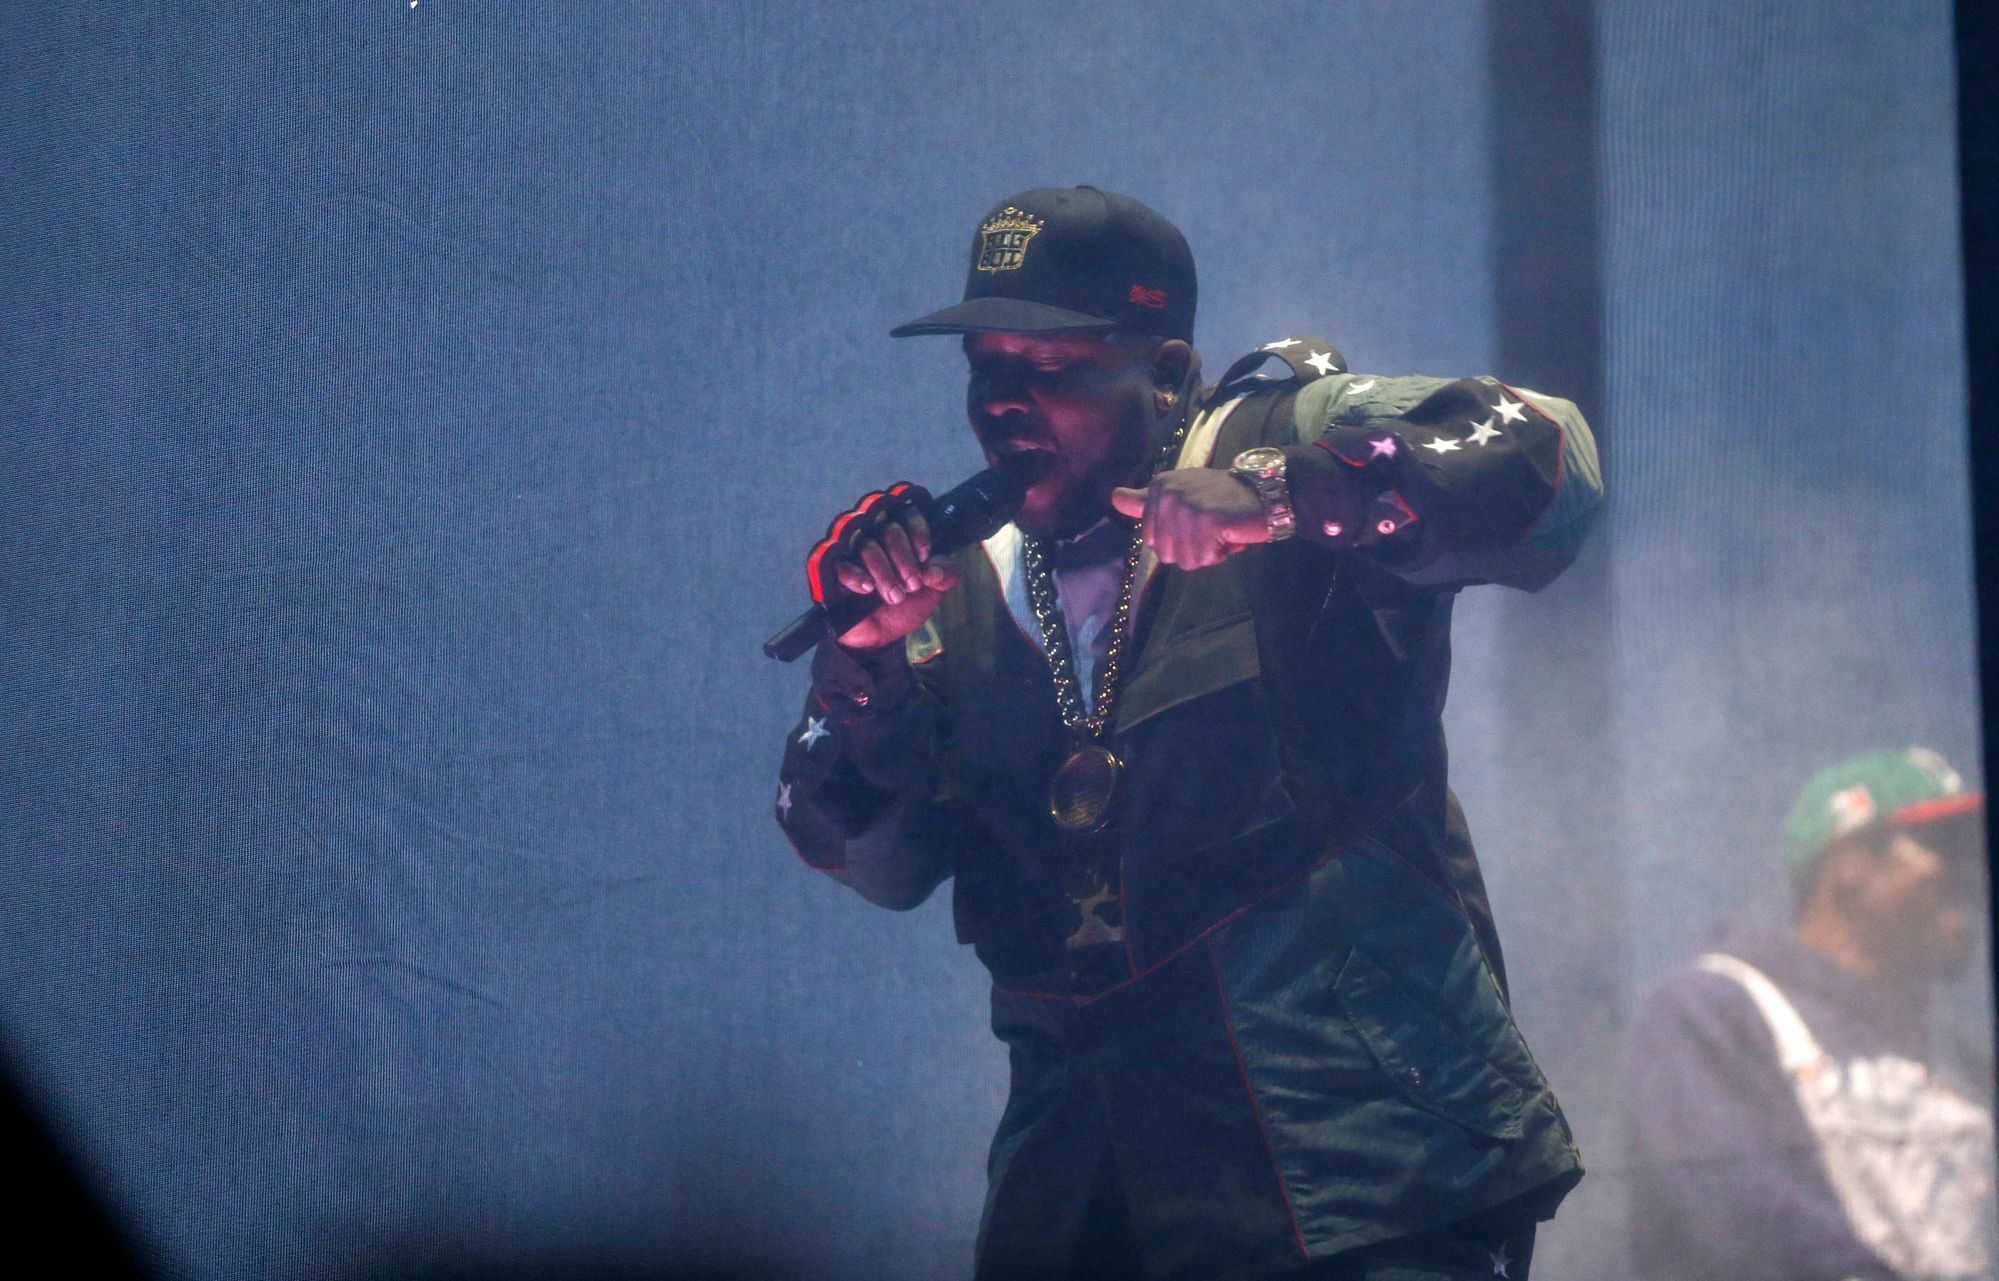 Big Boi of Outkast performs at the Coachella Valley Music and Arts Festival in Indio